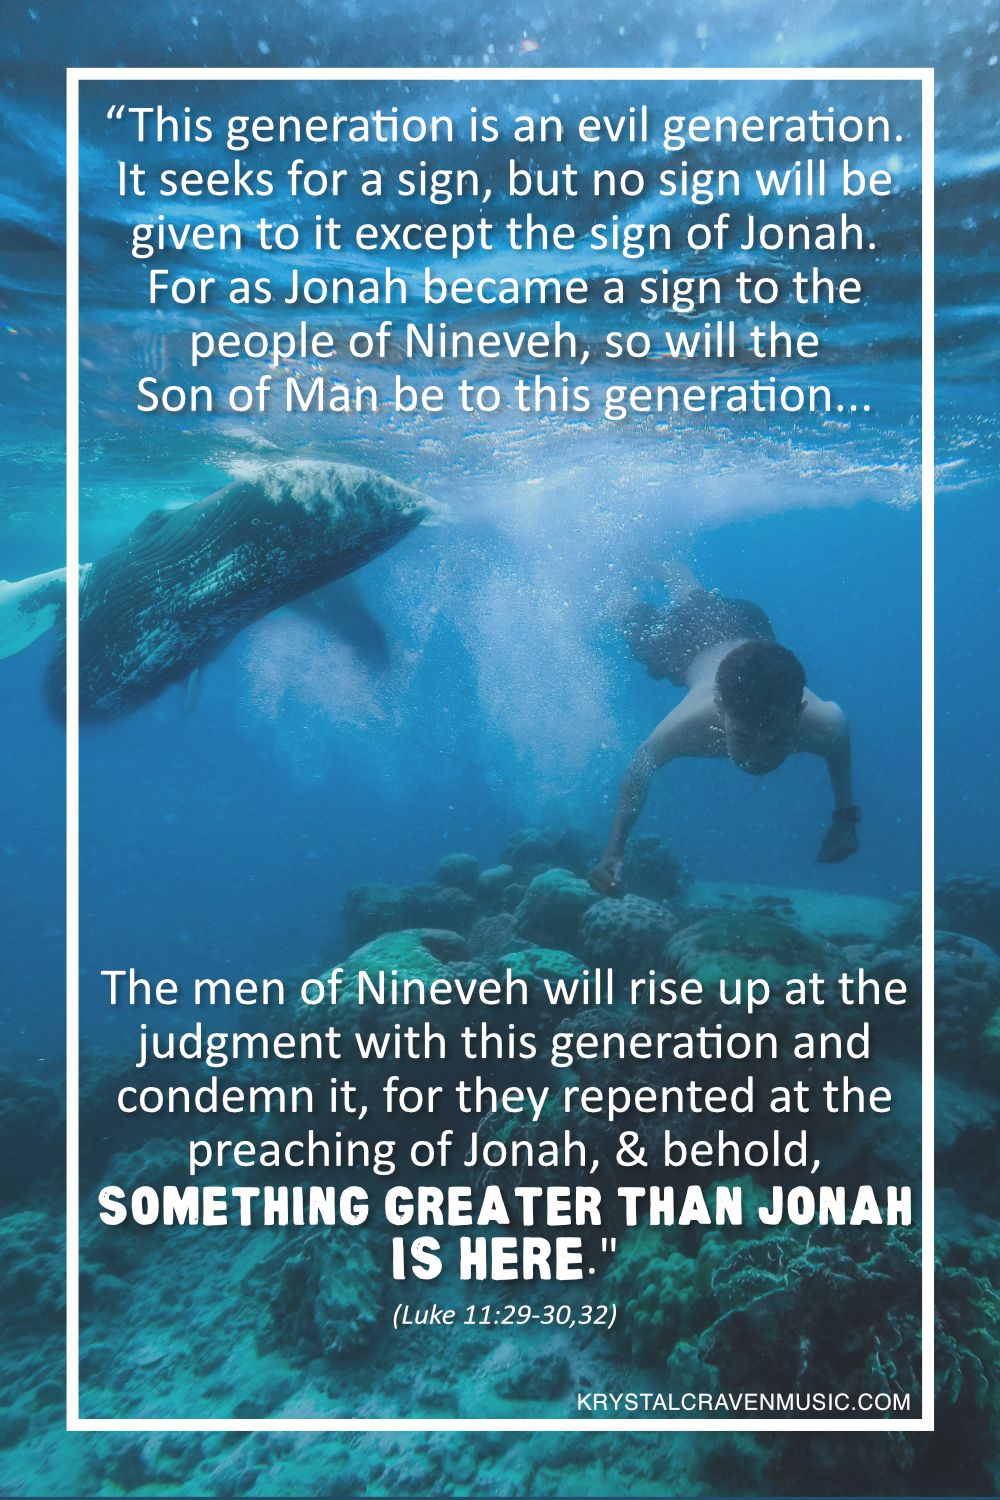 The text from Luke 11:29-30,32 "“This generation is an evil generation. It seeks for a sign, but no sign will be given to it except the sign of Jonah. For as Jonah became a sign to the people of Nineveh, so will the Son of Man be to this generation... The men of Nineveh will rise up at the judgment with this generation and condemn it, for they repented at the preaching of Jonah, and behold, something greater than Jonah is here." overlaying a man swimming underwater near coral with a whale in the background.